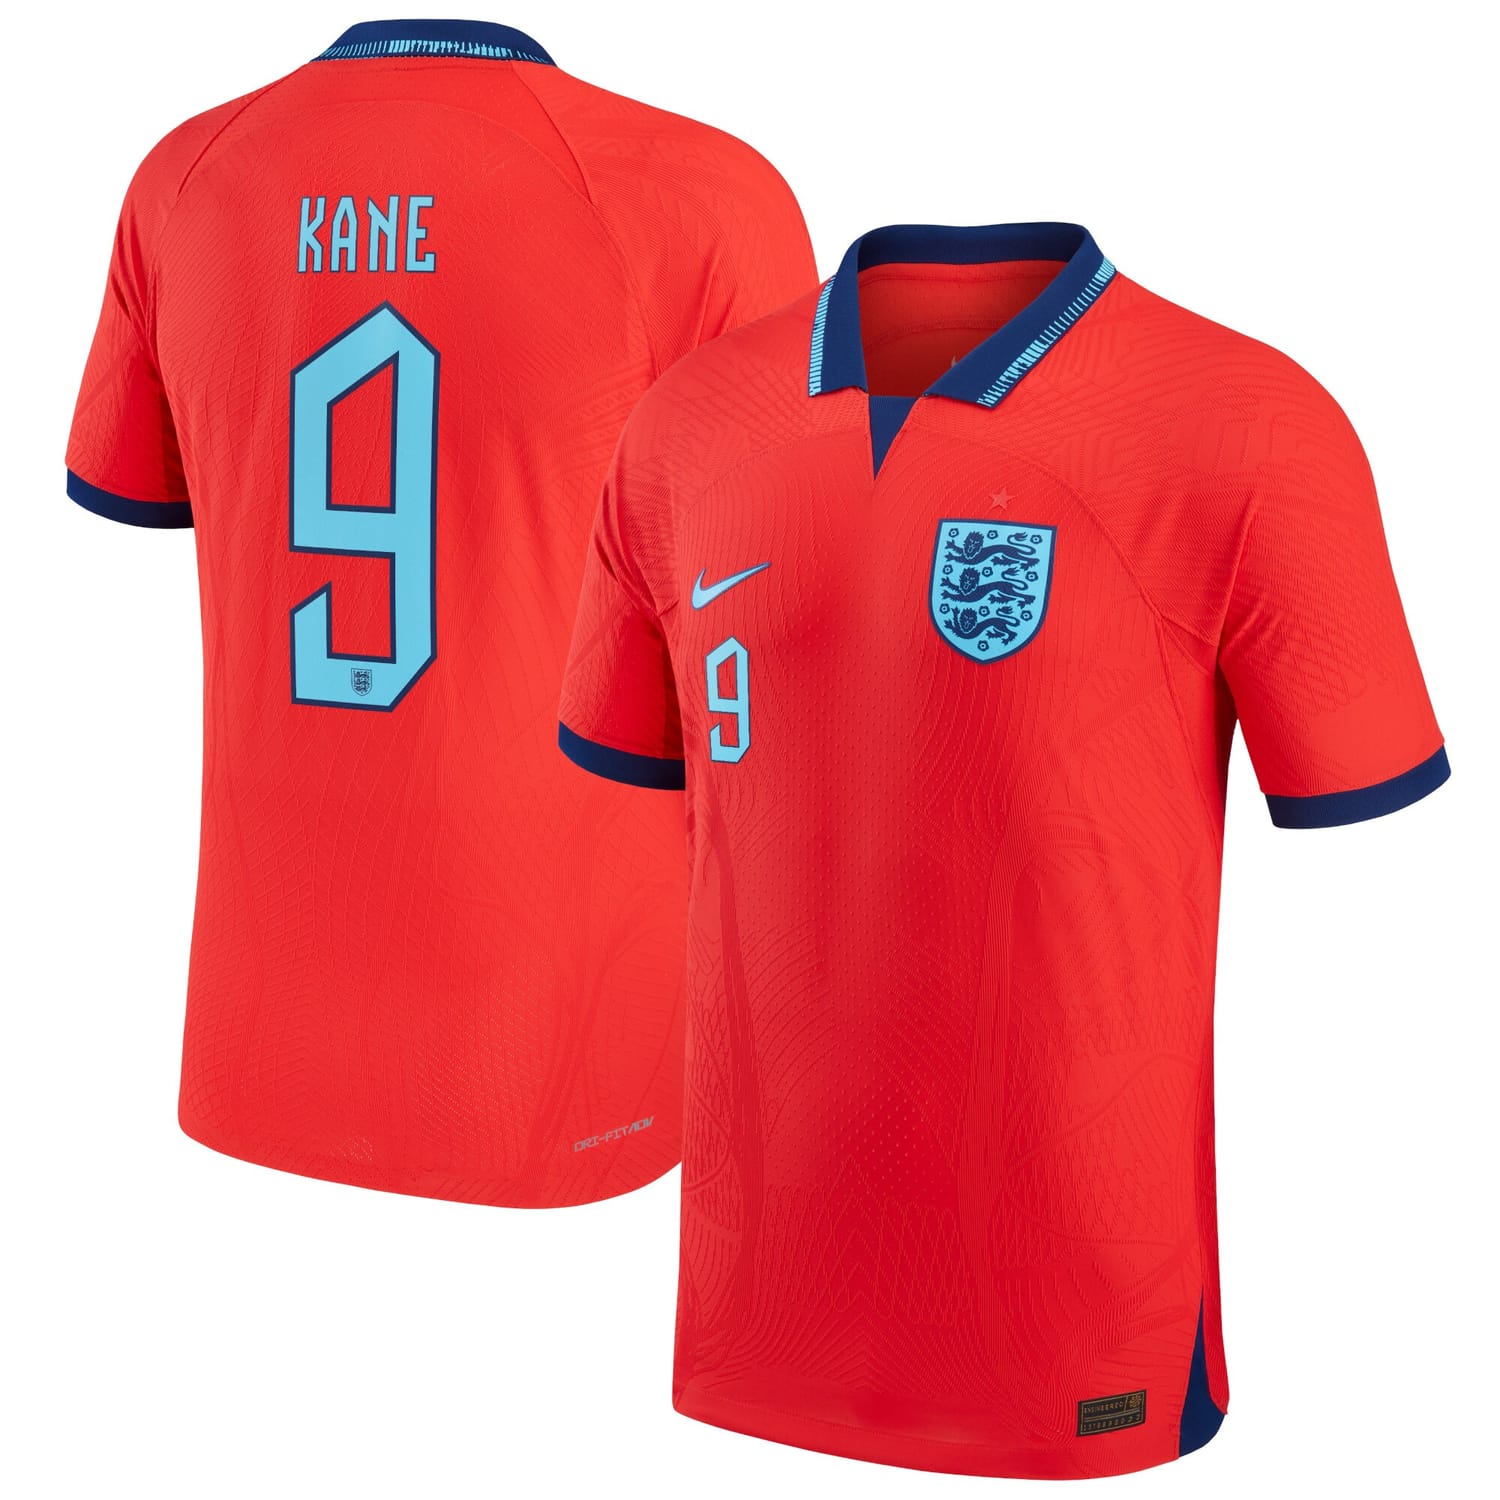 England National Team Away Authentic Jersey Shirt 2022 player Harry Kane 9 printing for Men